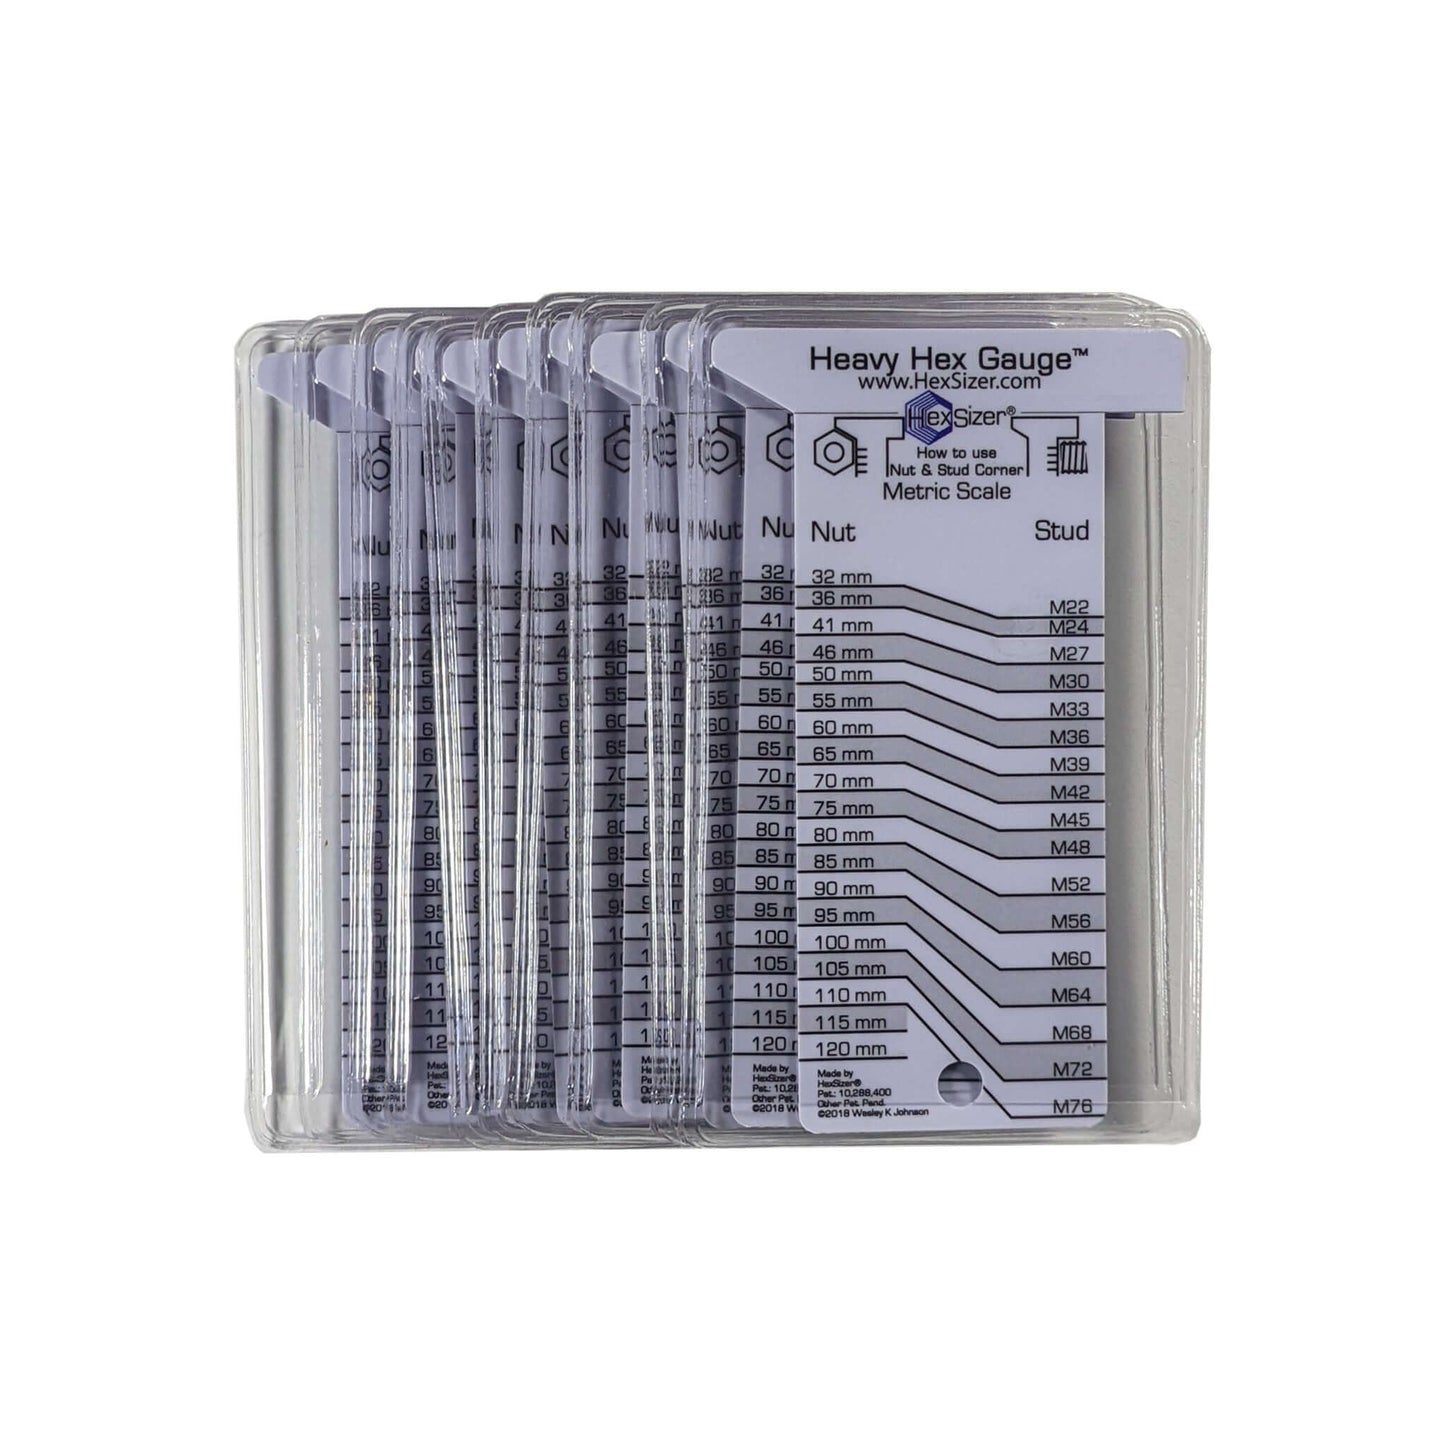 10 Pack with sleeves - Gray on White - Plastic Heavy Hex Gauge - Metric Only